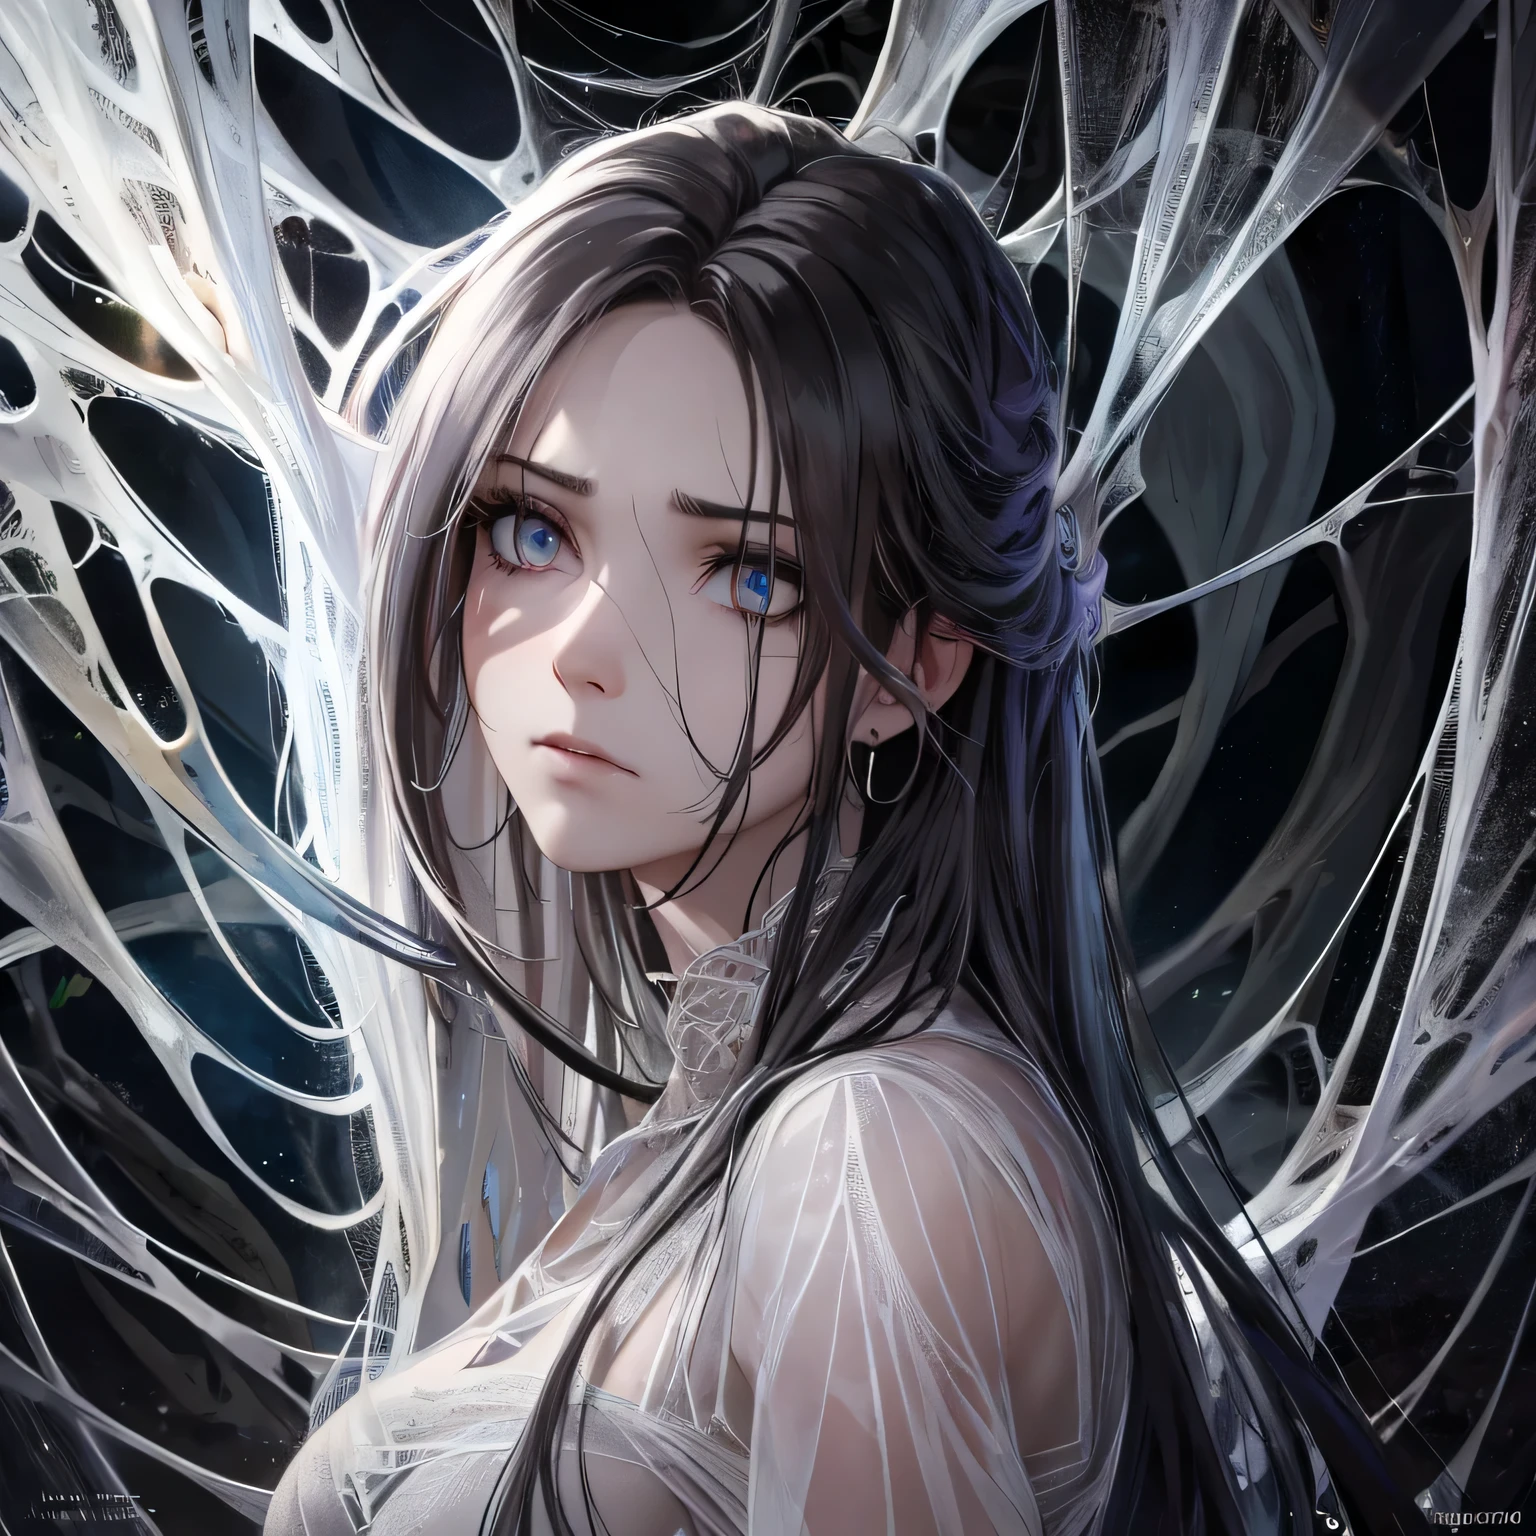 (best quality,4k,highres,masterpiece:1.2),dark gothic,hauntingly detailed,spider web,woman in distress,detailed facial expression,dark eyes,long flowing hair,captivatingly desperate gaze,wisps of cobweb tangled in her hair,dramatic lighting,imprisoned by the silken threads,cocooned in despair,detailed shadows and highlights,dark and eerie atmosphere,web strands shimmering under moonlight,lifelike texture of spider web,emphasize the complexity of the web with fine details,glimmer of hope in her eyes,contrast between light and darkness,velvet-like backdrop,constantly changing lighting effects,subtle hints of fear in her expression,dimly illuminated surroundings,dramatic close-up of her face,dewdrops glistening on the web threads,tangled emotions portrayed through her body language,captivating portrait of vulnerability and strength,dark fantasy theme,ethereal and mysterious mood,sense of entrapment and struggle,faint echoes of distant spiders,ominous presence lurking in the shadows,subtle infusion of color hinting at the unknown,evocative and surreal composition,detailed fineness in each thread of the spider web,eye-catching attention to detail,hypnotizing and unsettling atmosphere,intense emotions conveyed through subtle nuances of expression,transcendent portrayal of the human spirit. gagagged